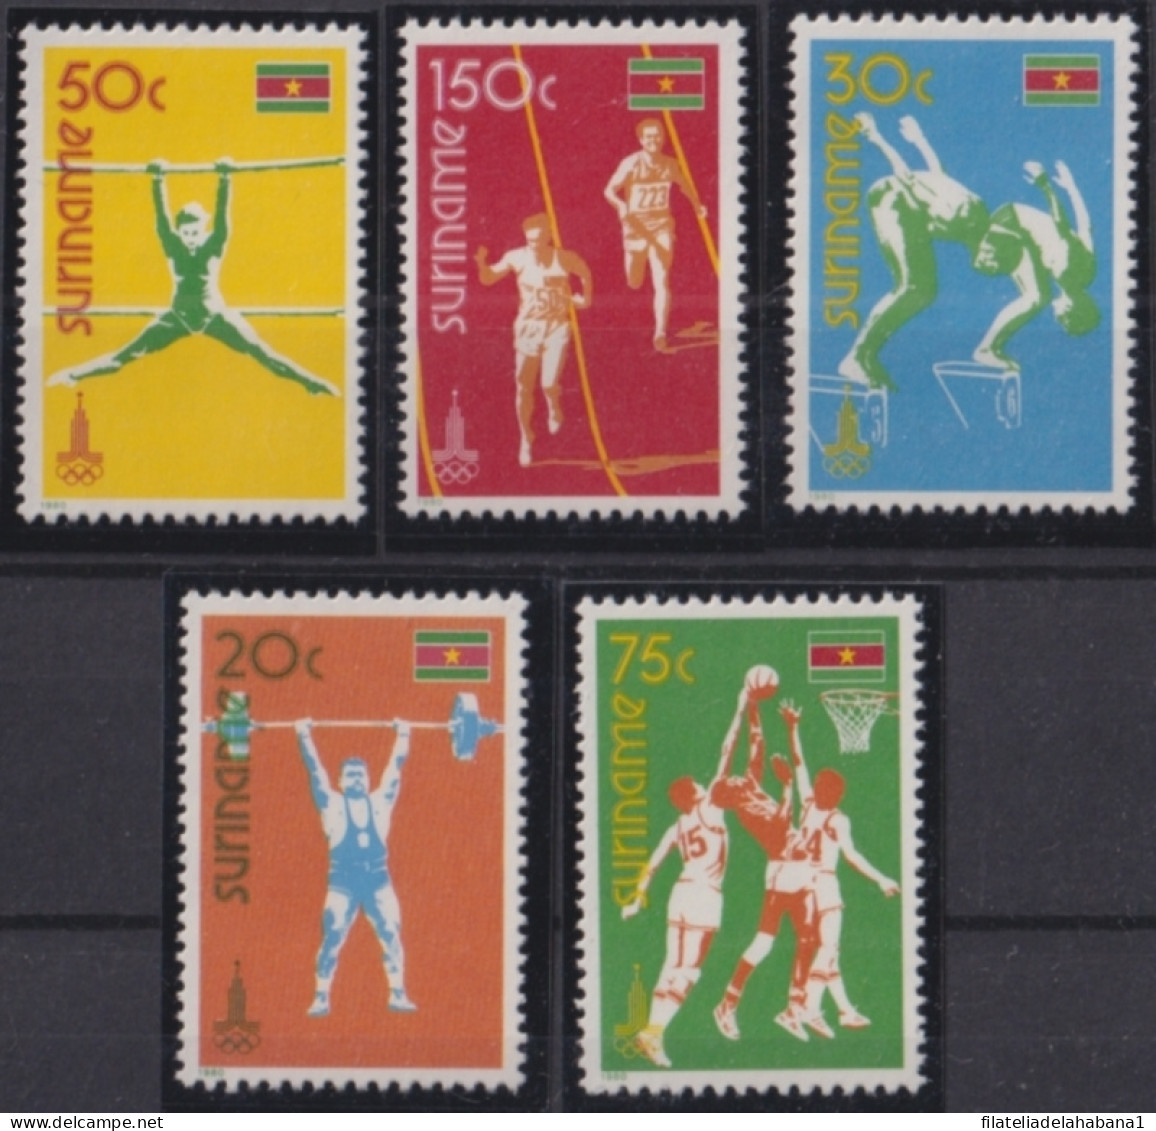 F-EX50224 SURINAME MNH 1980 OLYMPIC GAMES MOSCOW ATHLETISM SWIMMING BASKET.  - Verano 1980: Moscu